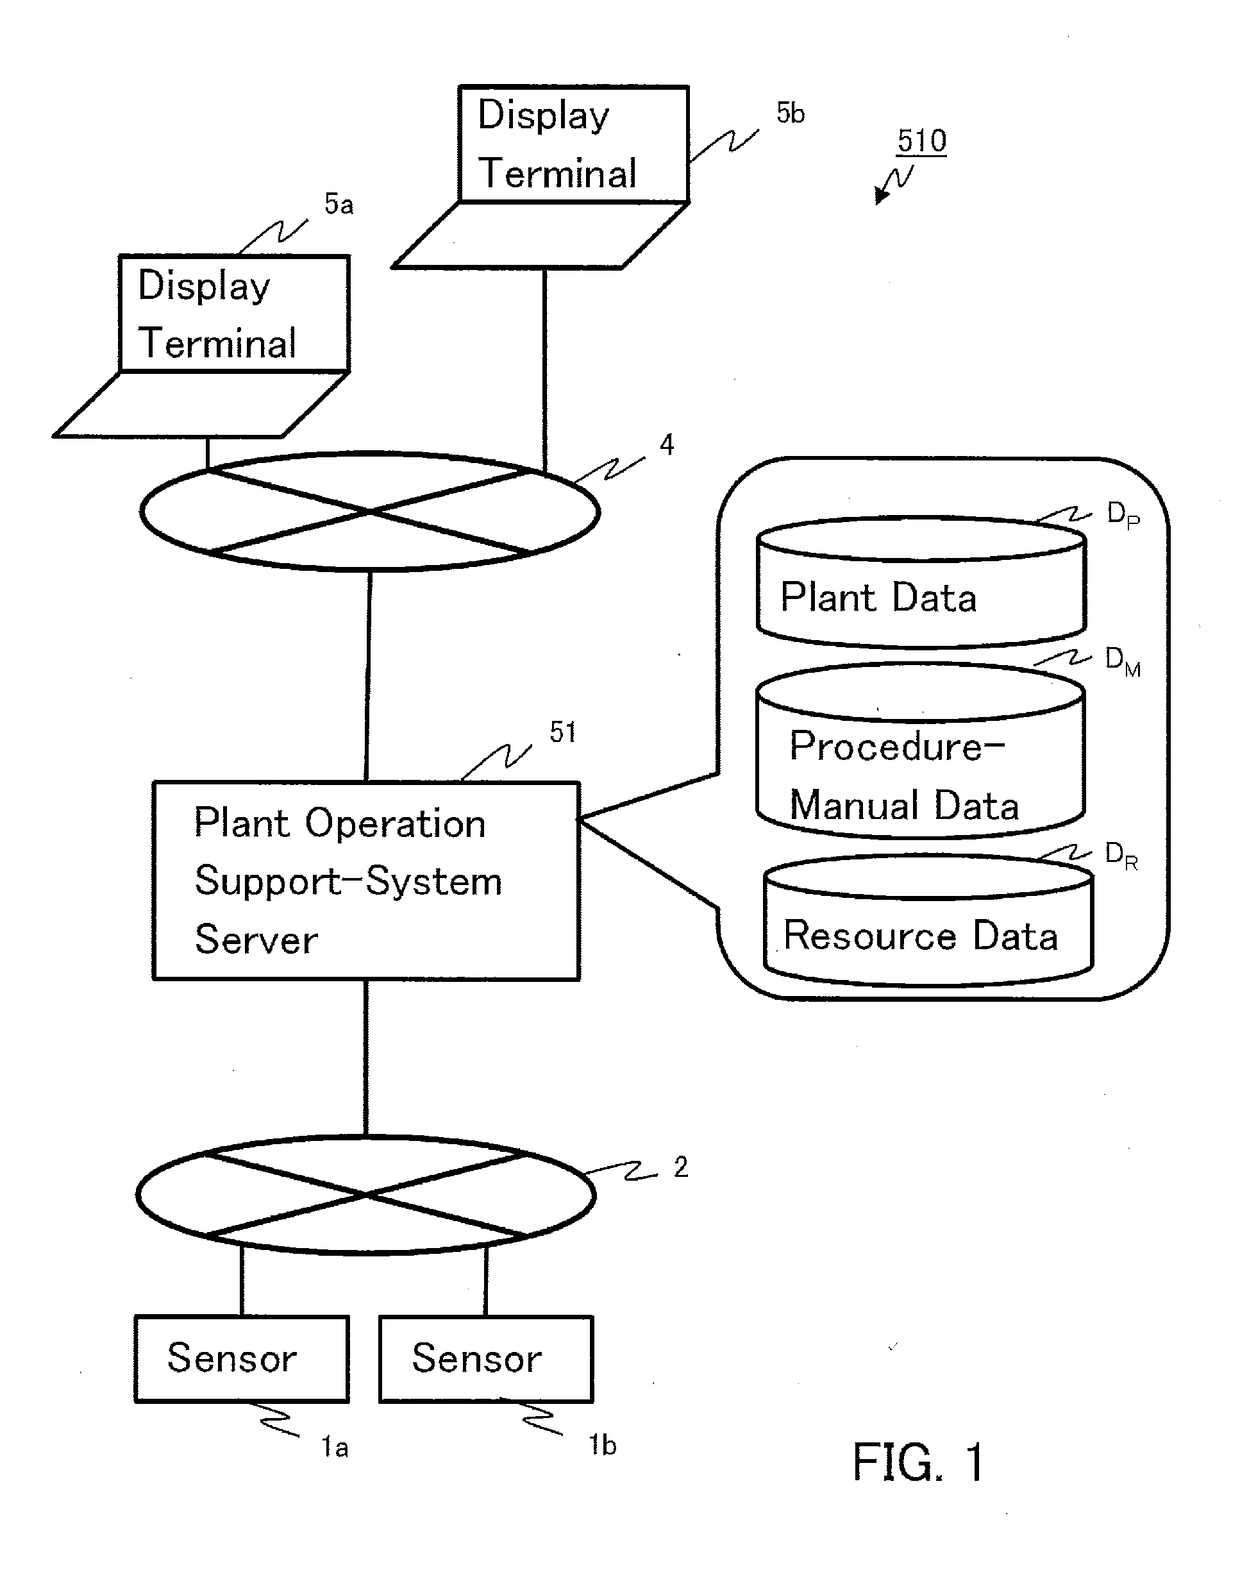 Plant Operation Support-System Server and Plant Operation Support System